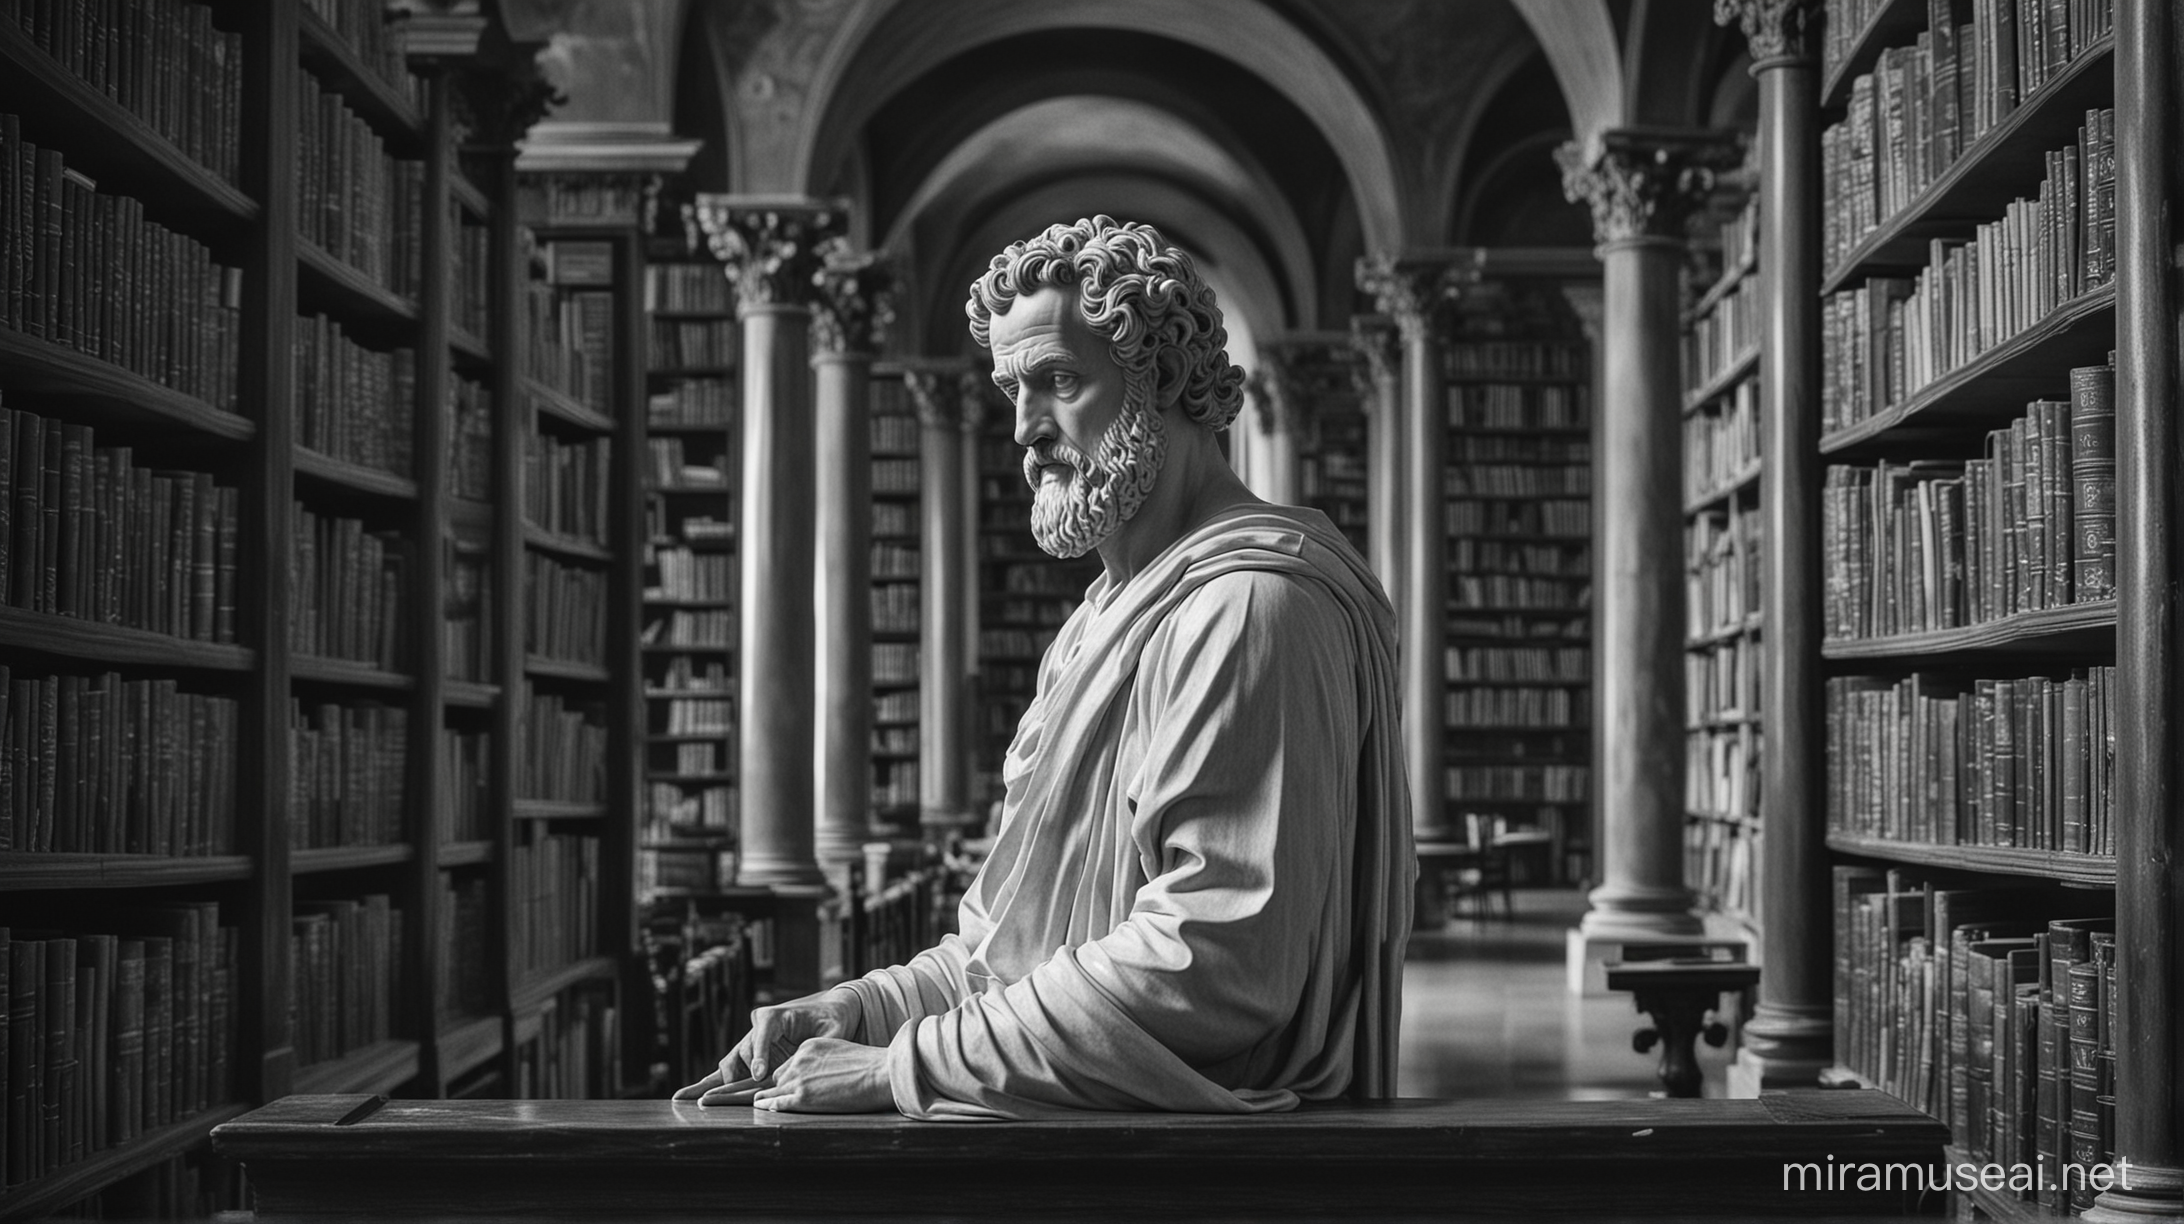 Ancient Stoic Philosopher Contemplating in Grand Library